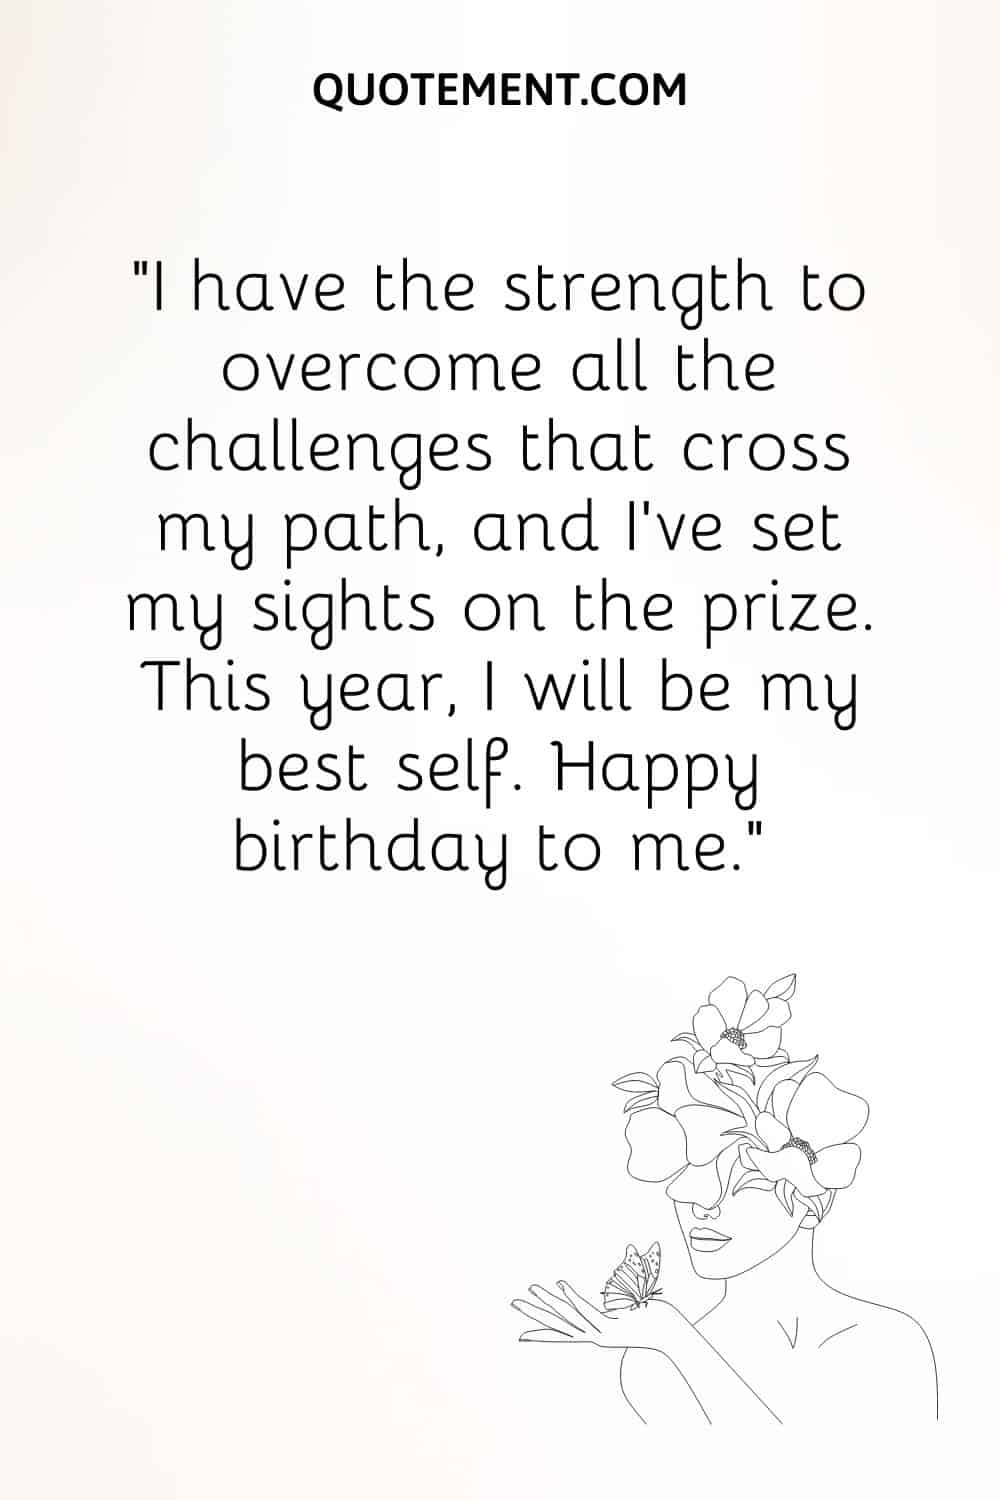 I have the strength to overcome all the challenges that cross my path, and I’ve set my sights on the prize